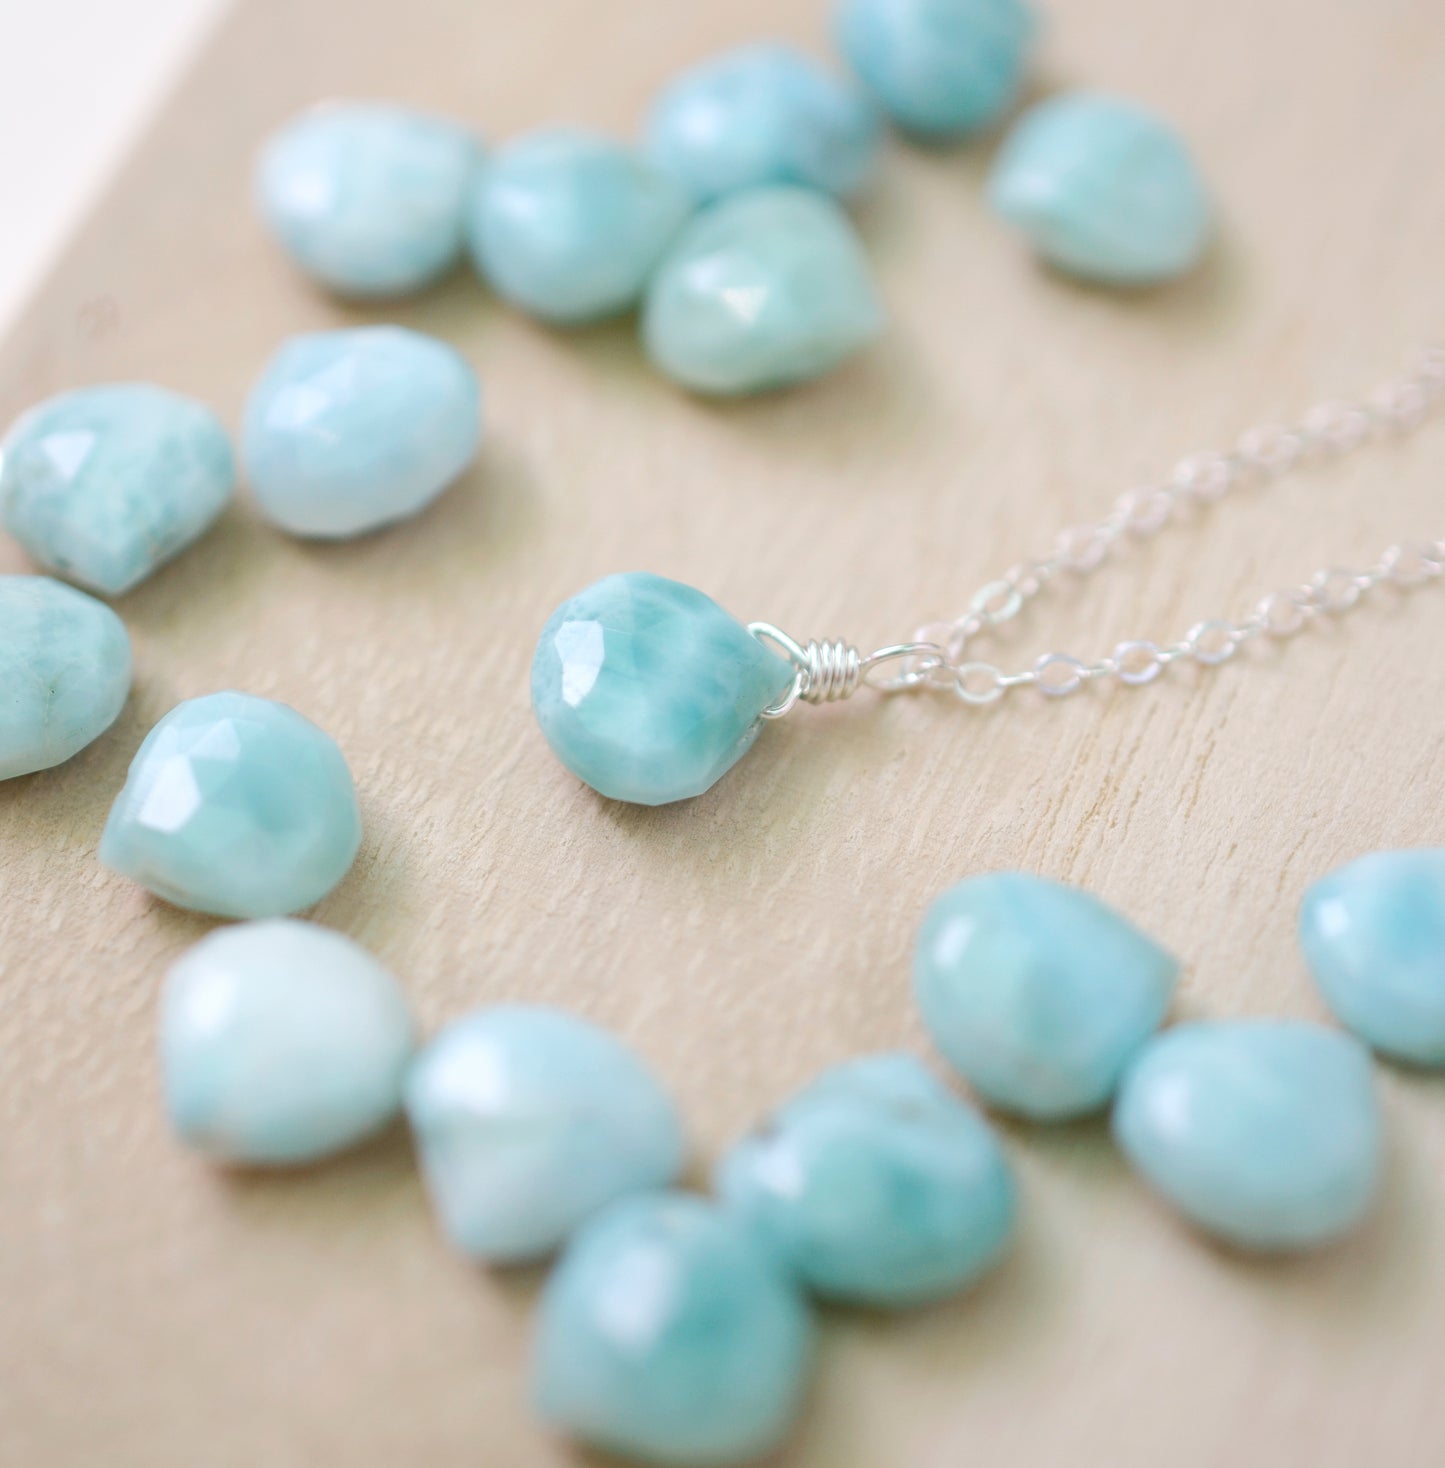 Close up of blue Larimar stone options with a sterling silver necklace sample.